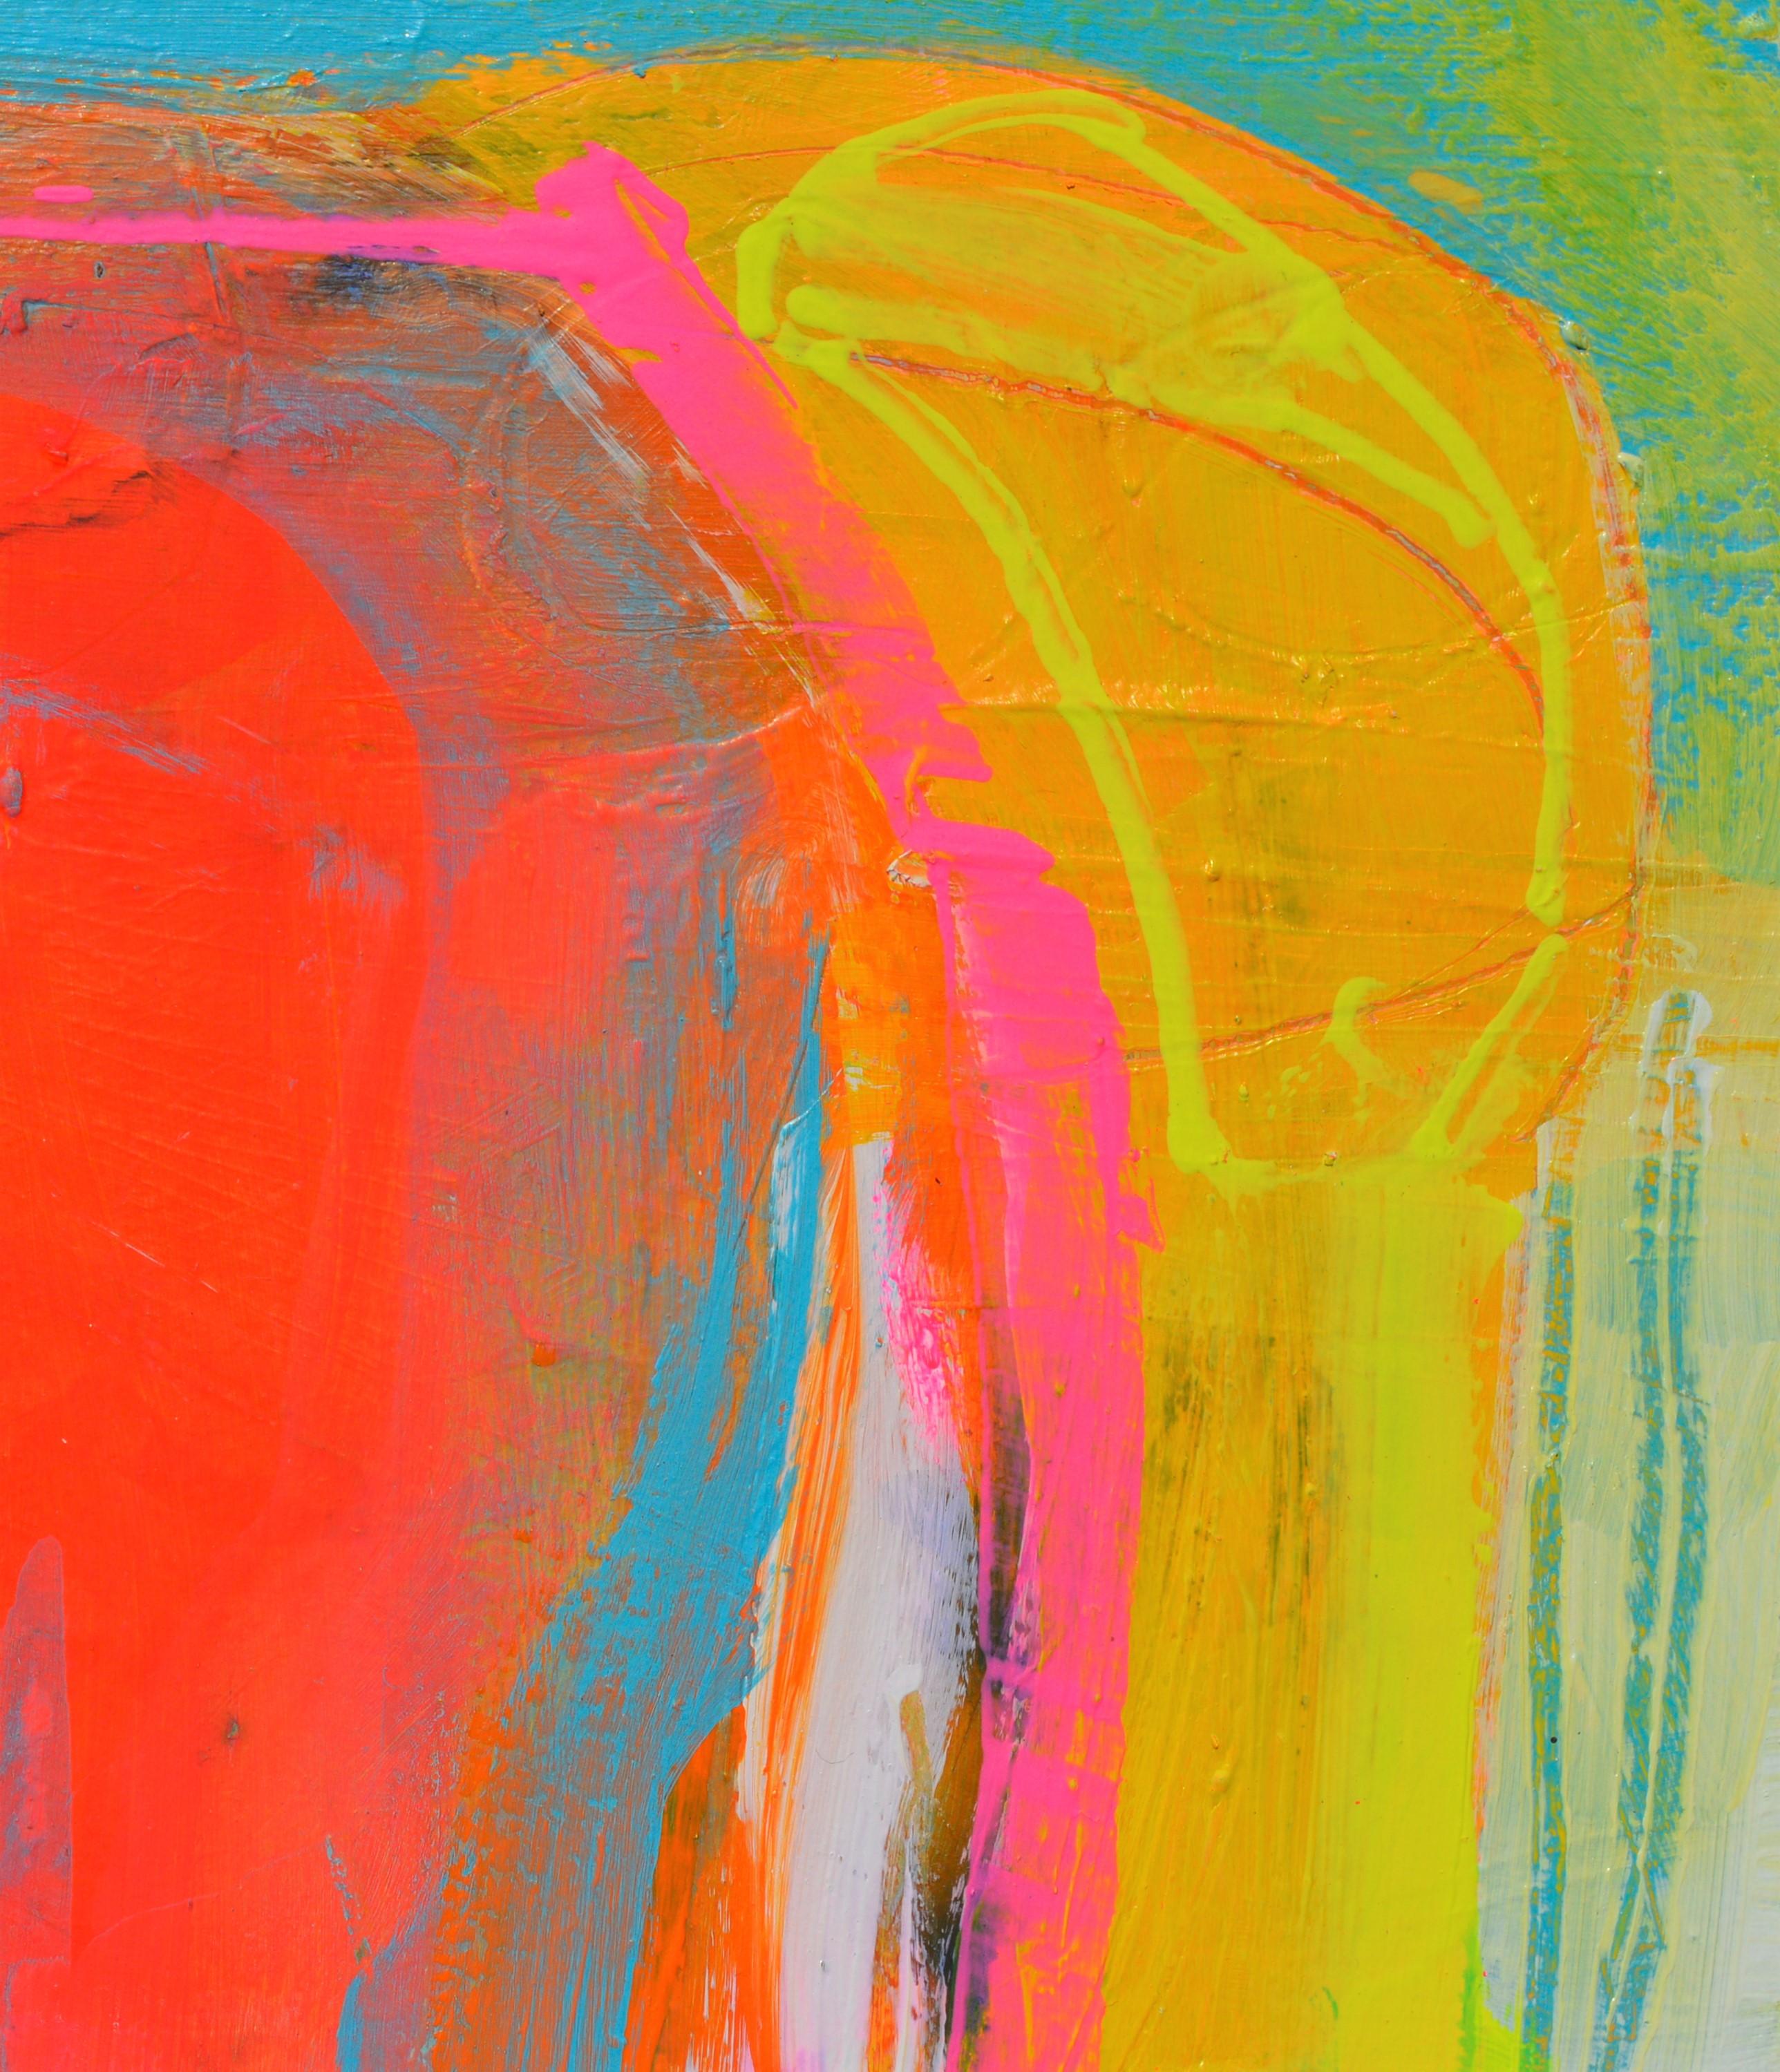 <p>Artist Comments<br>A vibrant abstract in hues of red, pink, orange, yellow, and blue by artist Patrick O'Boyle. 